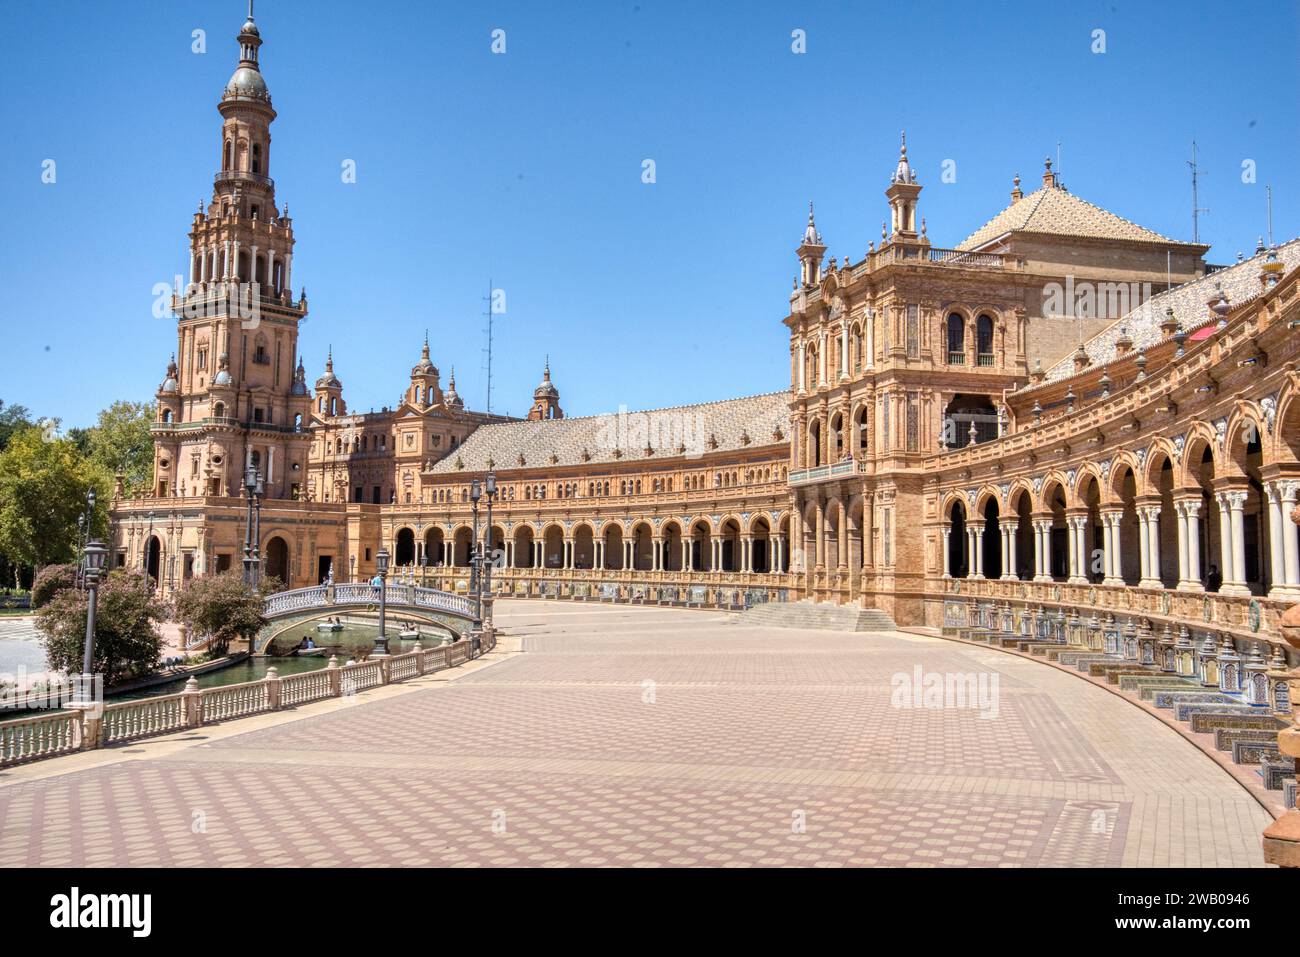 Beautiful Plaza de Espana in Seville, Spain. The plaza was completed in 1929 for the Ibero-American Exposition and is now a popular tourist destinatio Stock Photo